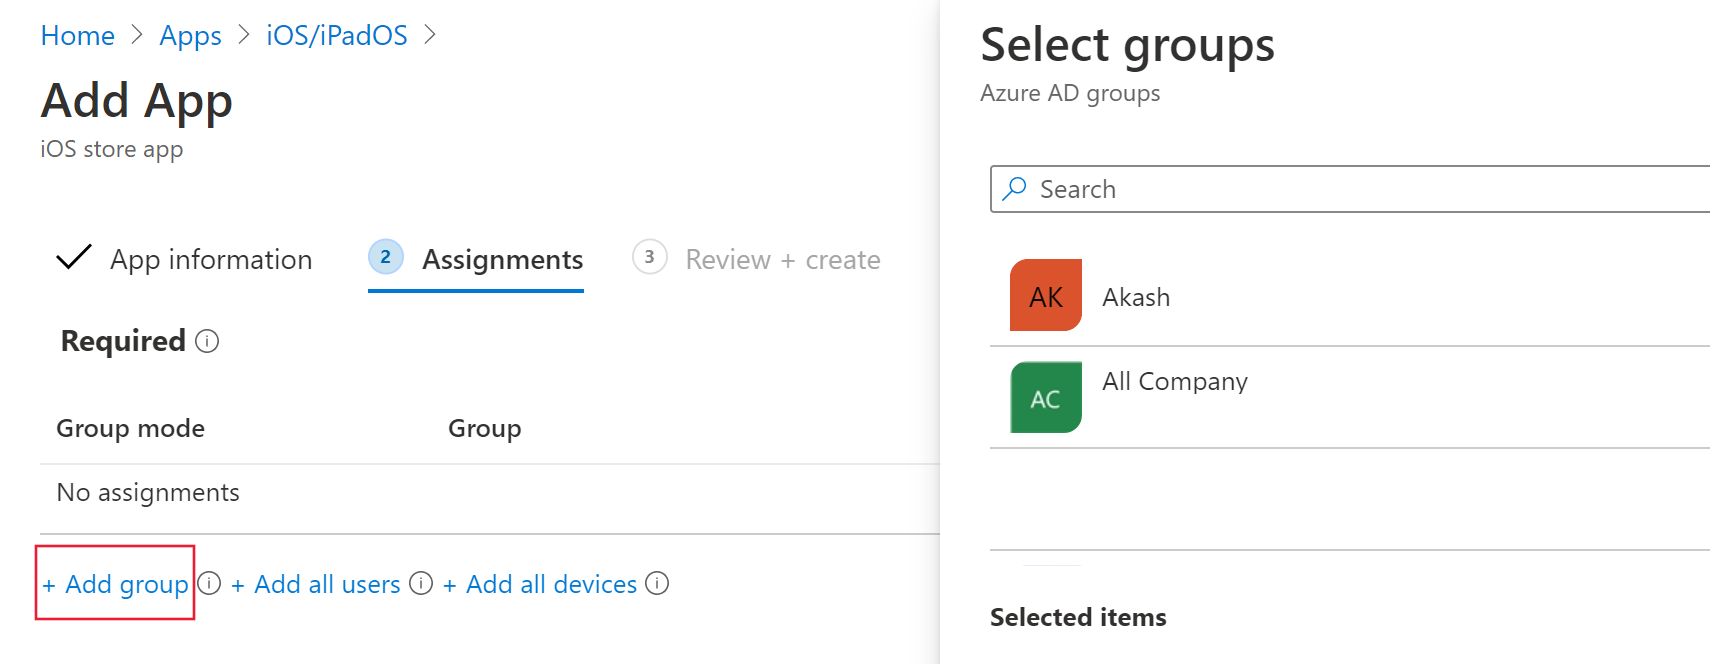 The Add group tab in the Microsoft Endpoint Manager Admin Center